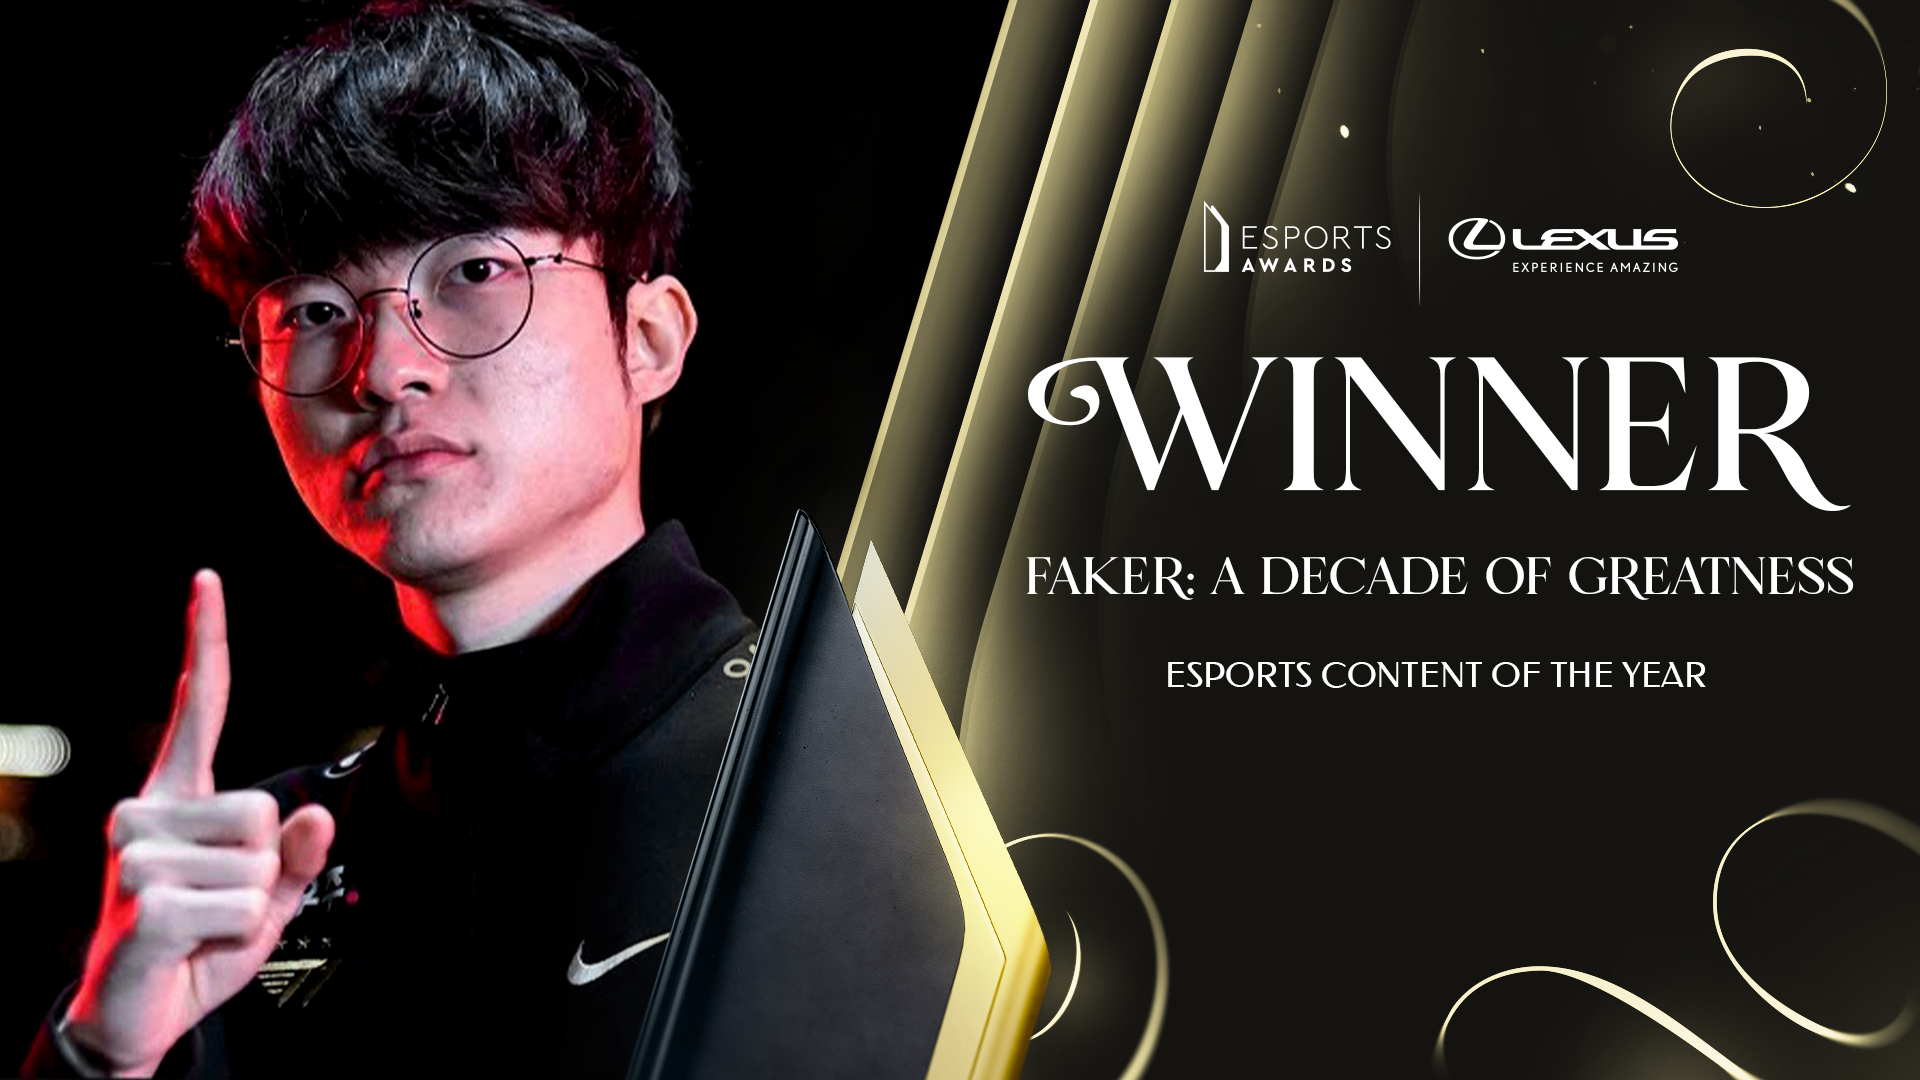 Esports Content of the Year: Faker: A Decade of Greatness